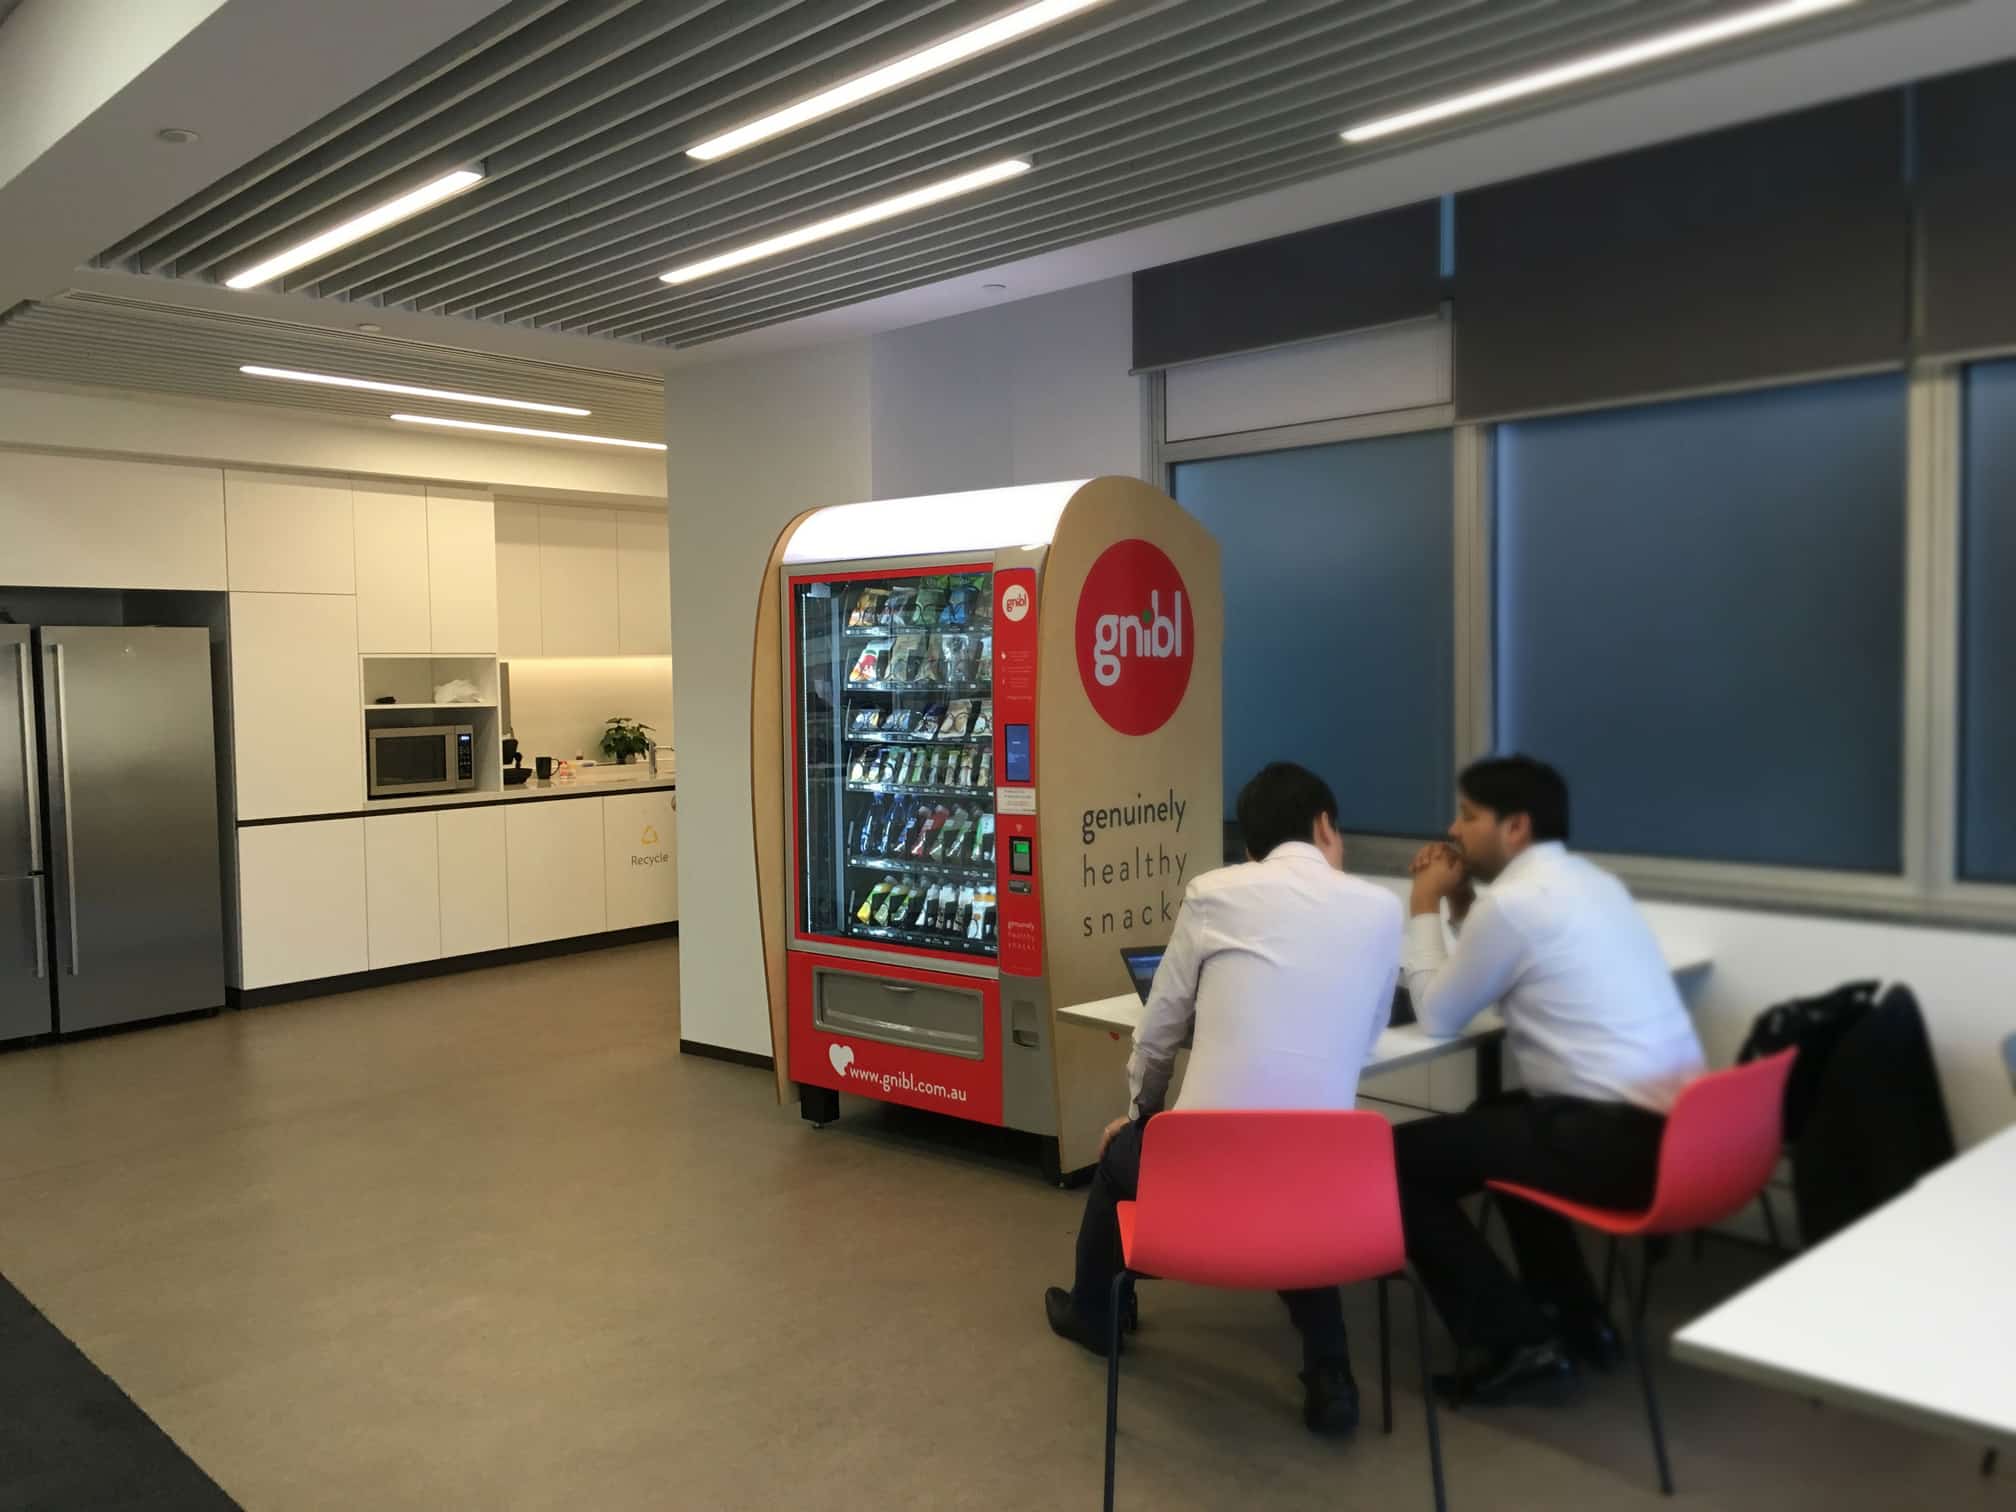 Gnibl Vending machine placed in an office workplace with two workers talking in the foreground.